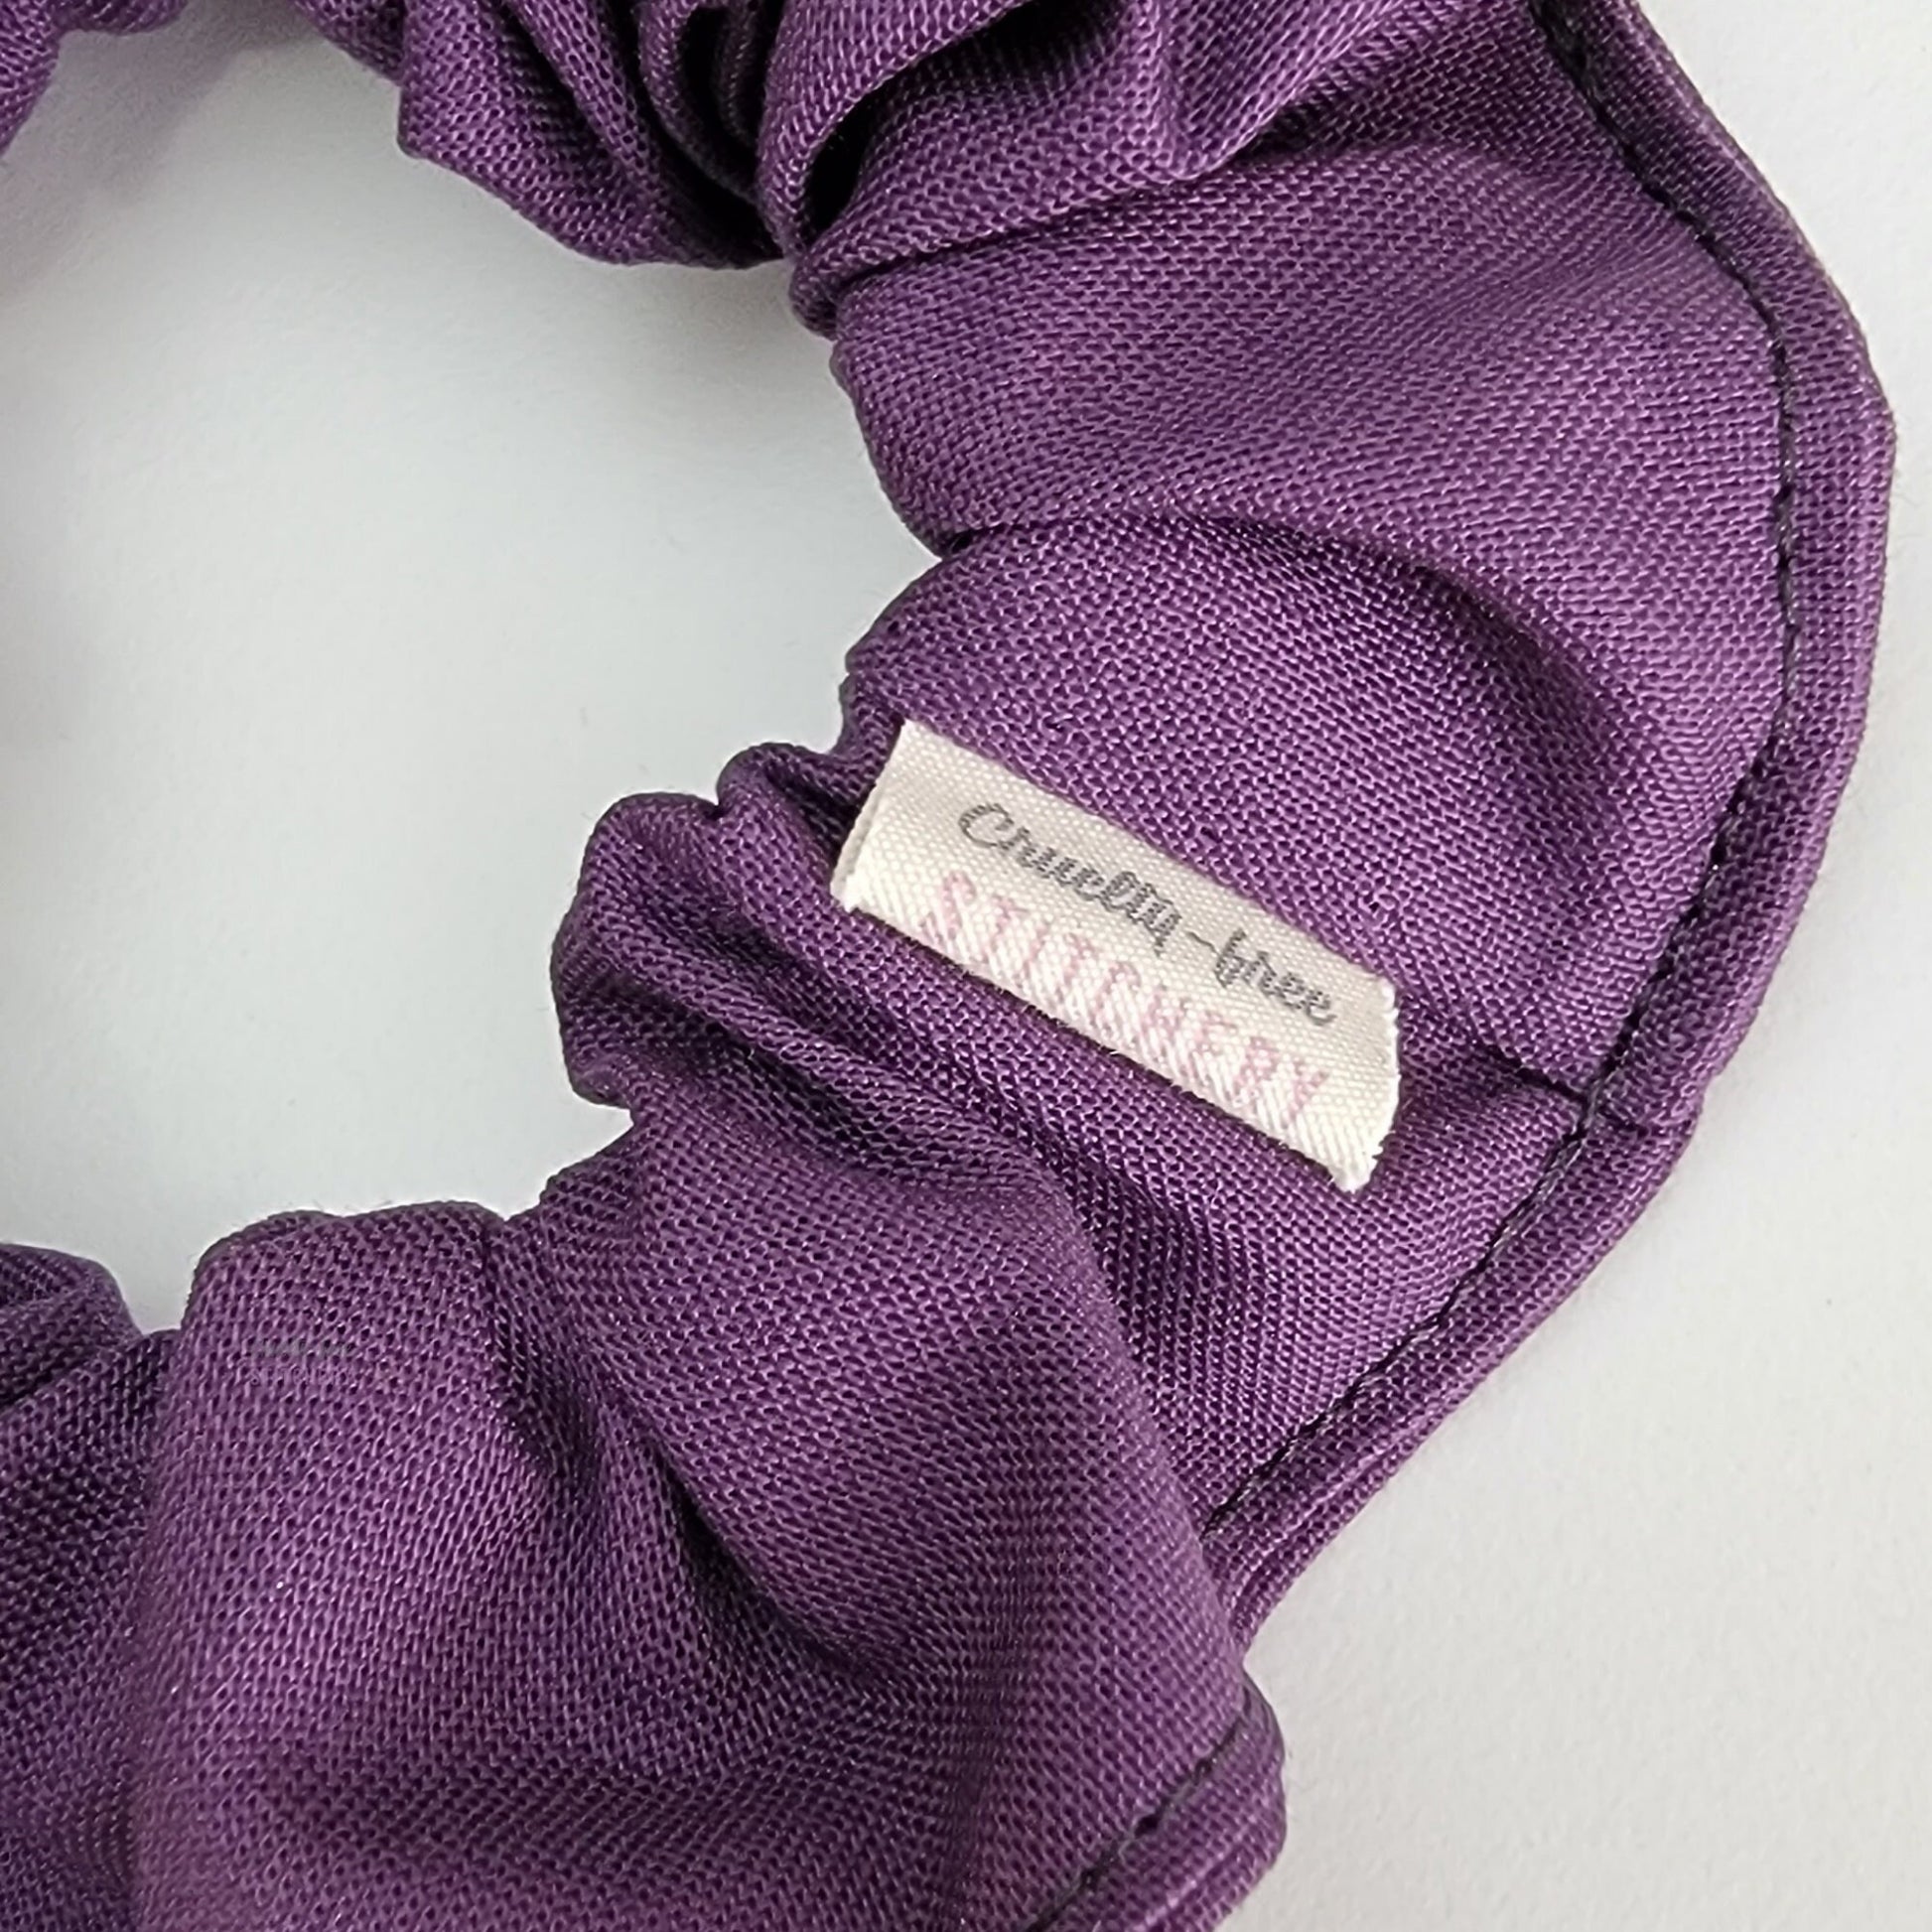 Close-up of a sage green scrunchie with a small white tag with the Cruelty-Free Stitchery logo.